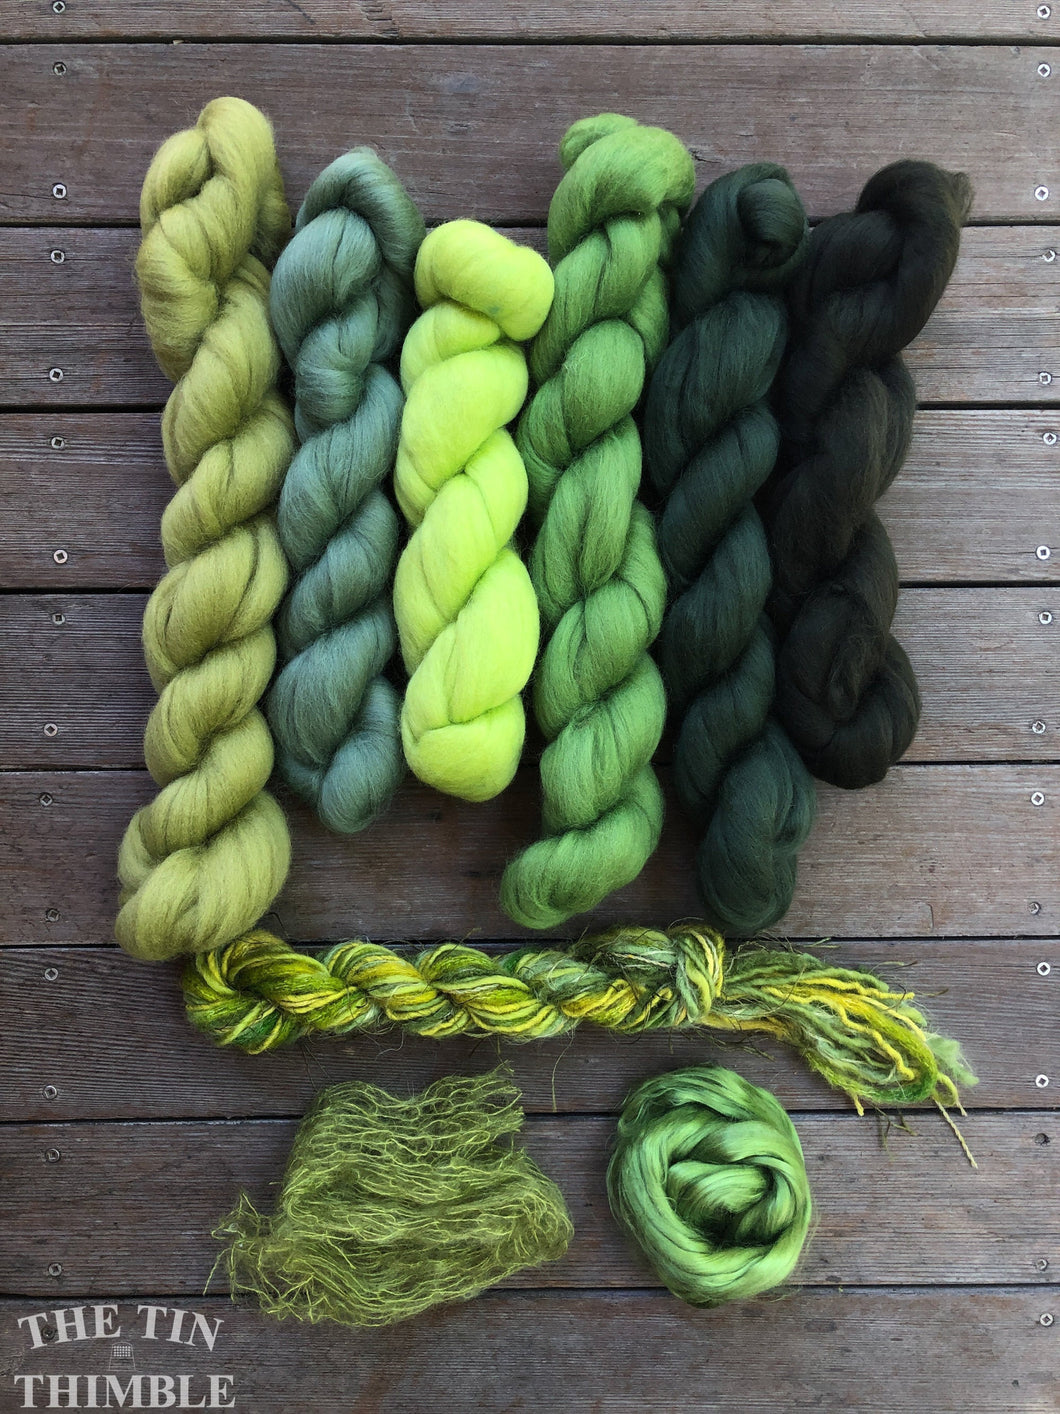 Merino Wool Roving Pack WITH EMBELLISHMENTS - Greens - Six Colors, 1 Ounce Each - High Quality Wool for Felting, Weaving and Spinning